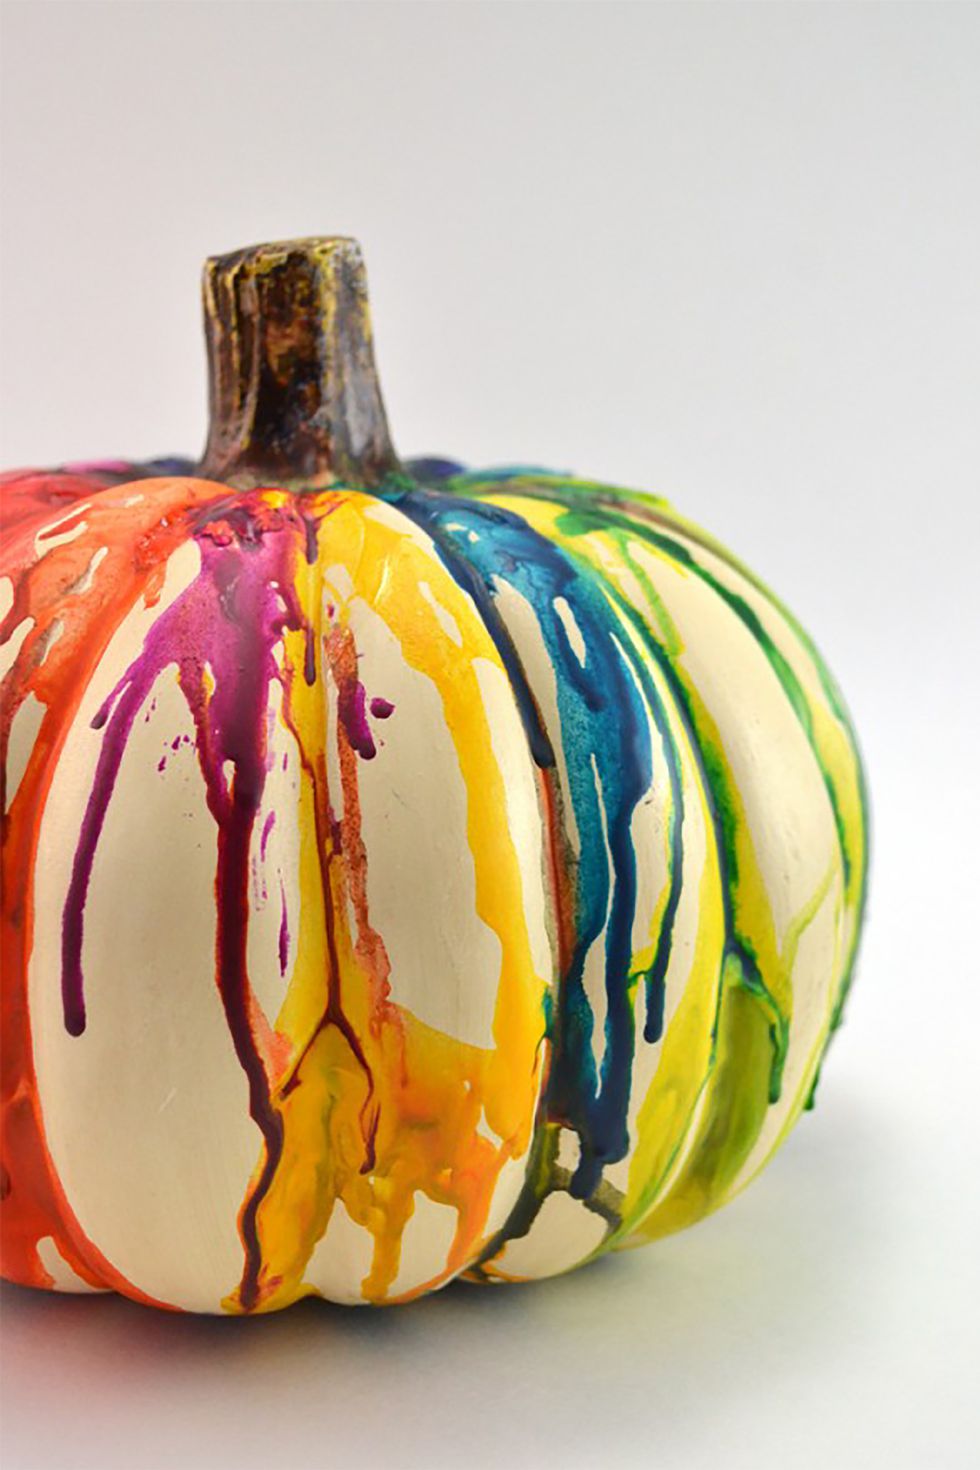 Exclusive idea to decorate pumpkin by melted crayons.